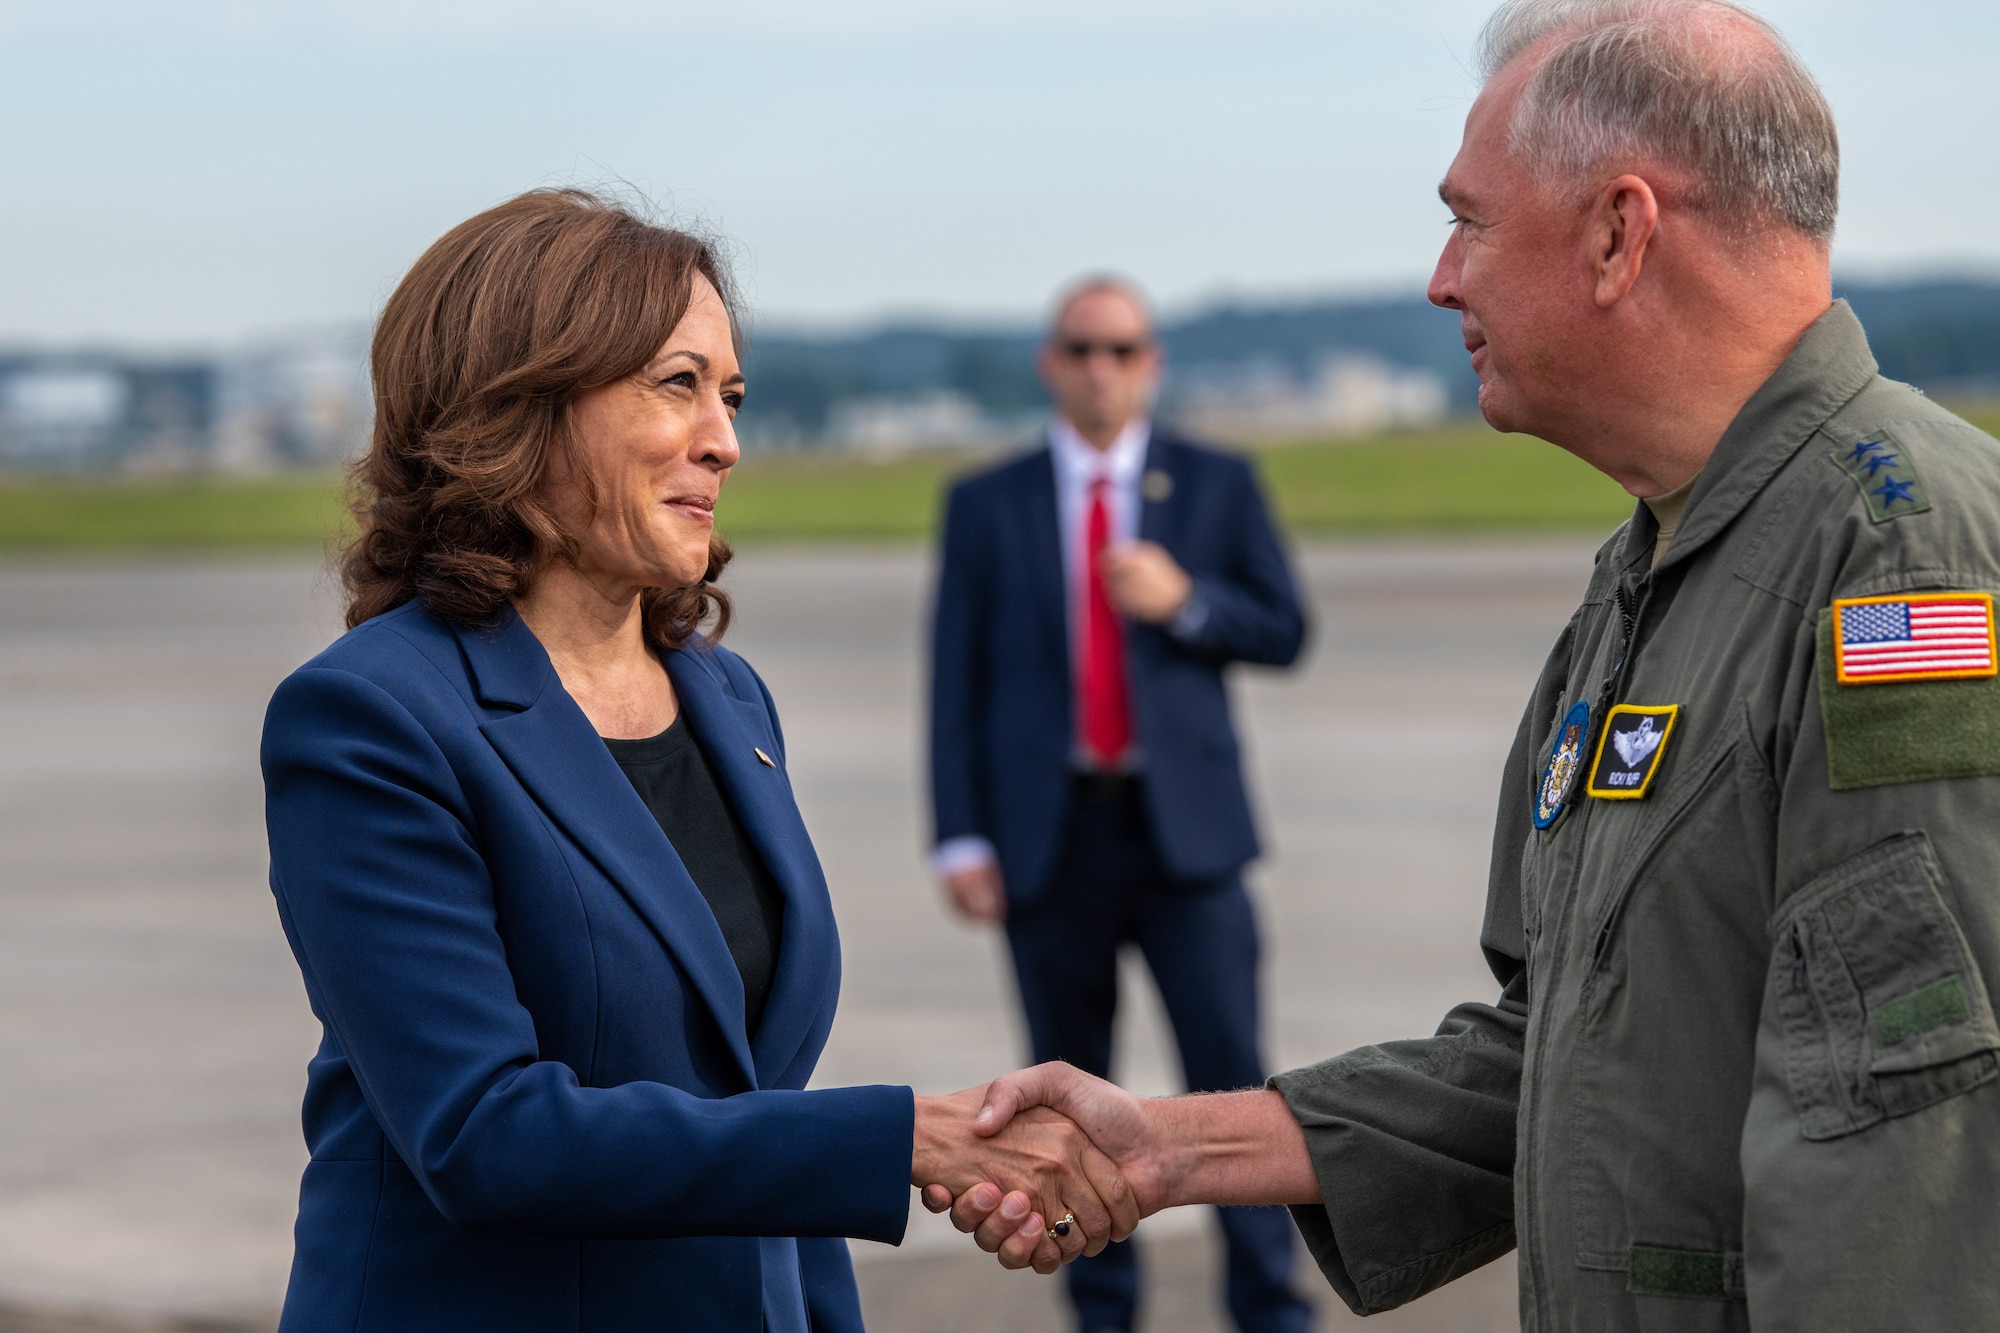 Vice President Harris shakes hands with Lt. Gen. Rupp